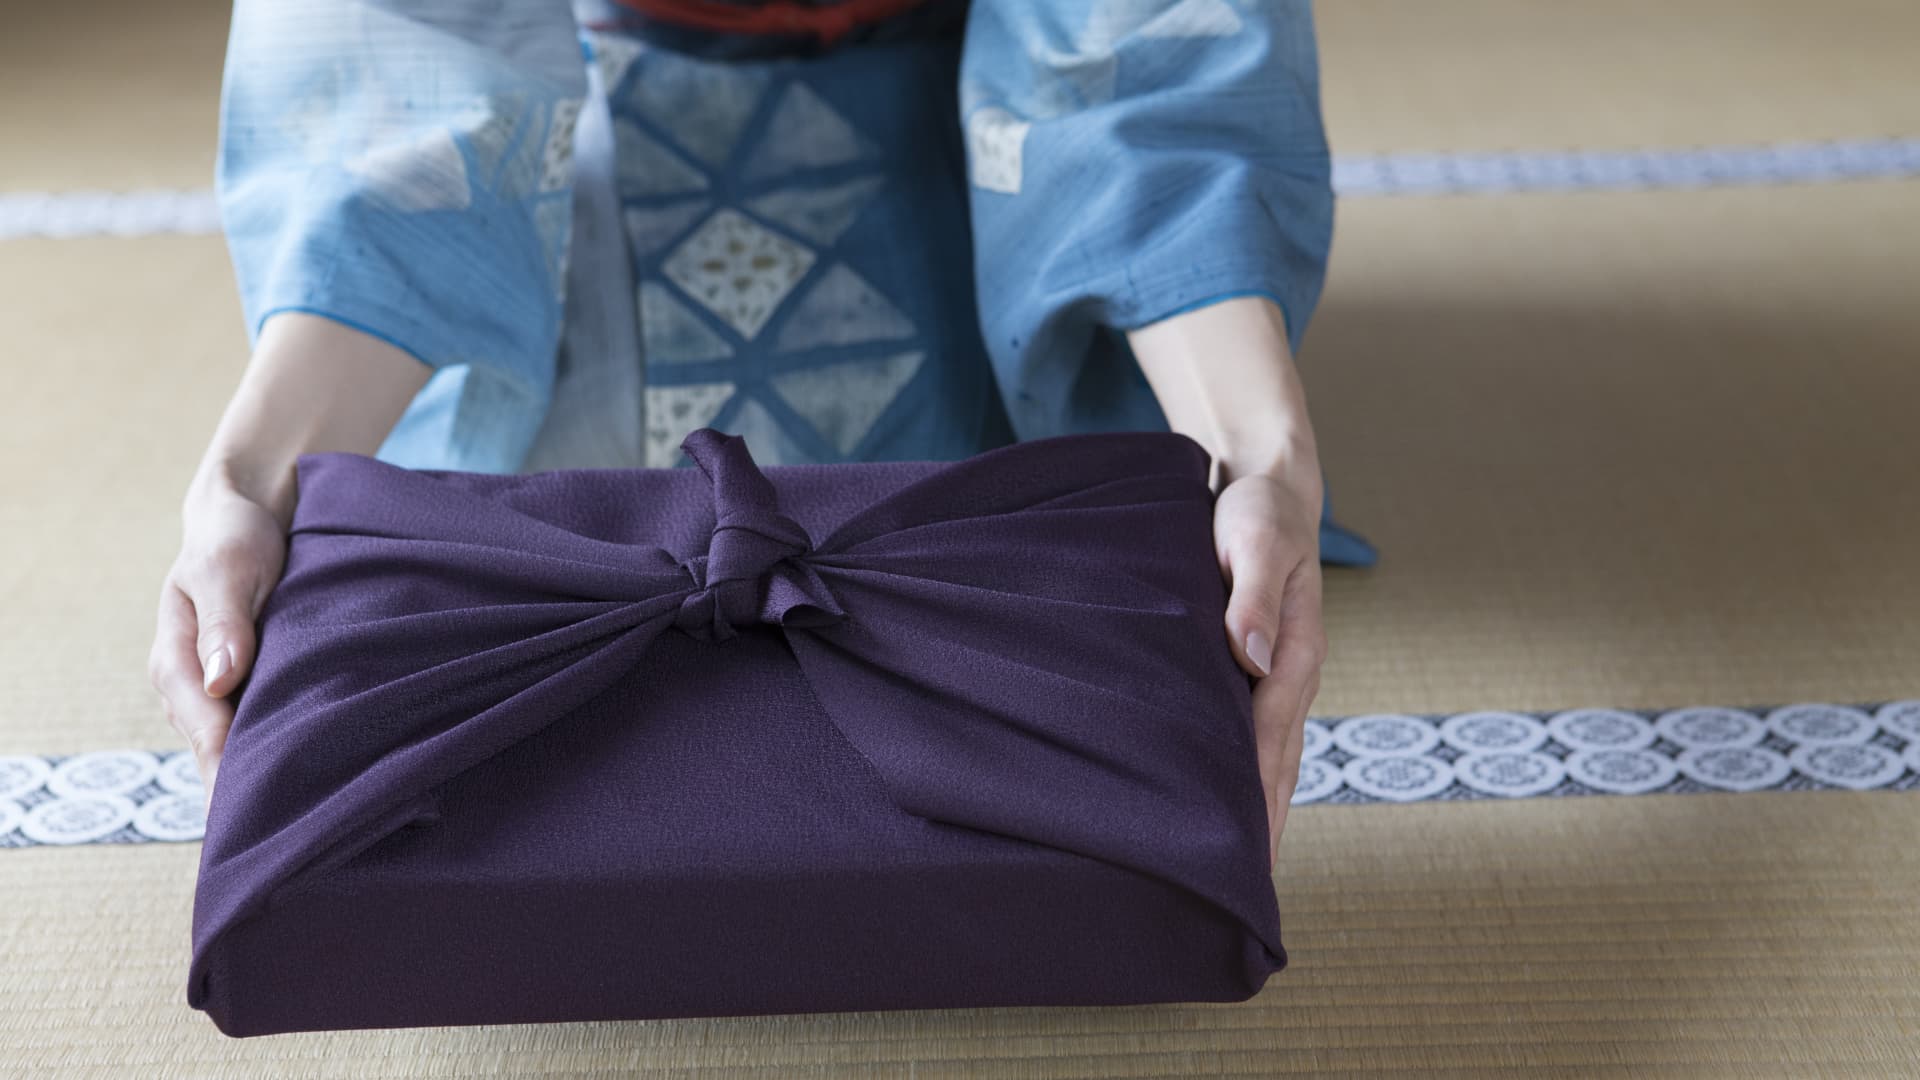 The Furoshiki cloth is commonly used to wrap presents, however unlike wrapping paper, the cloth is traditionally given back to the gift giver.